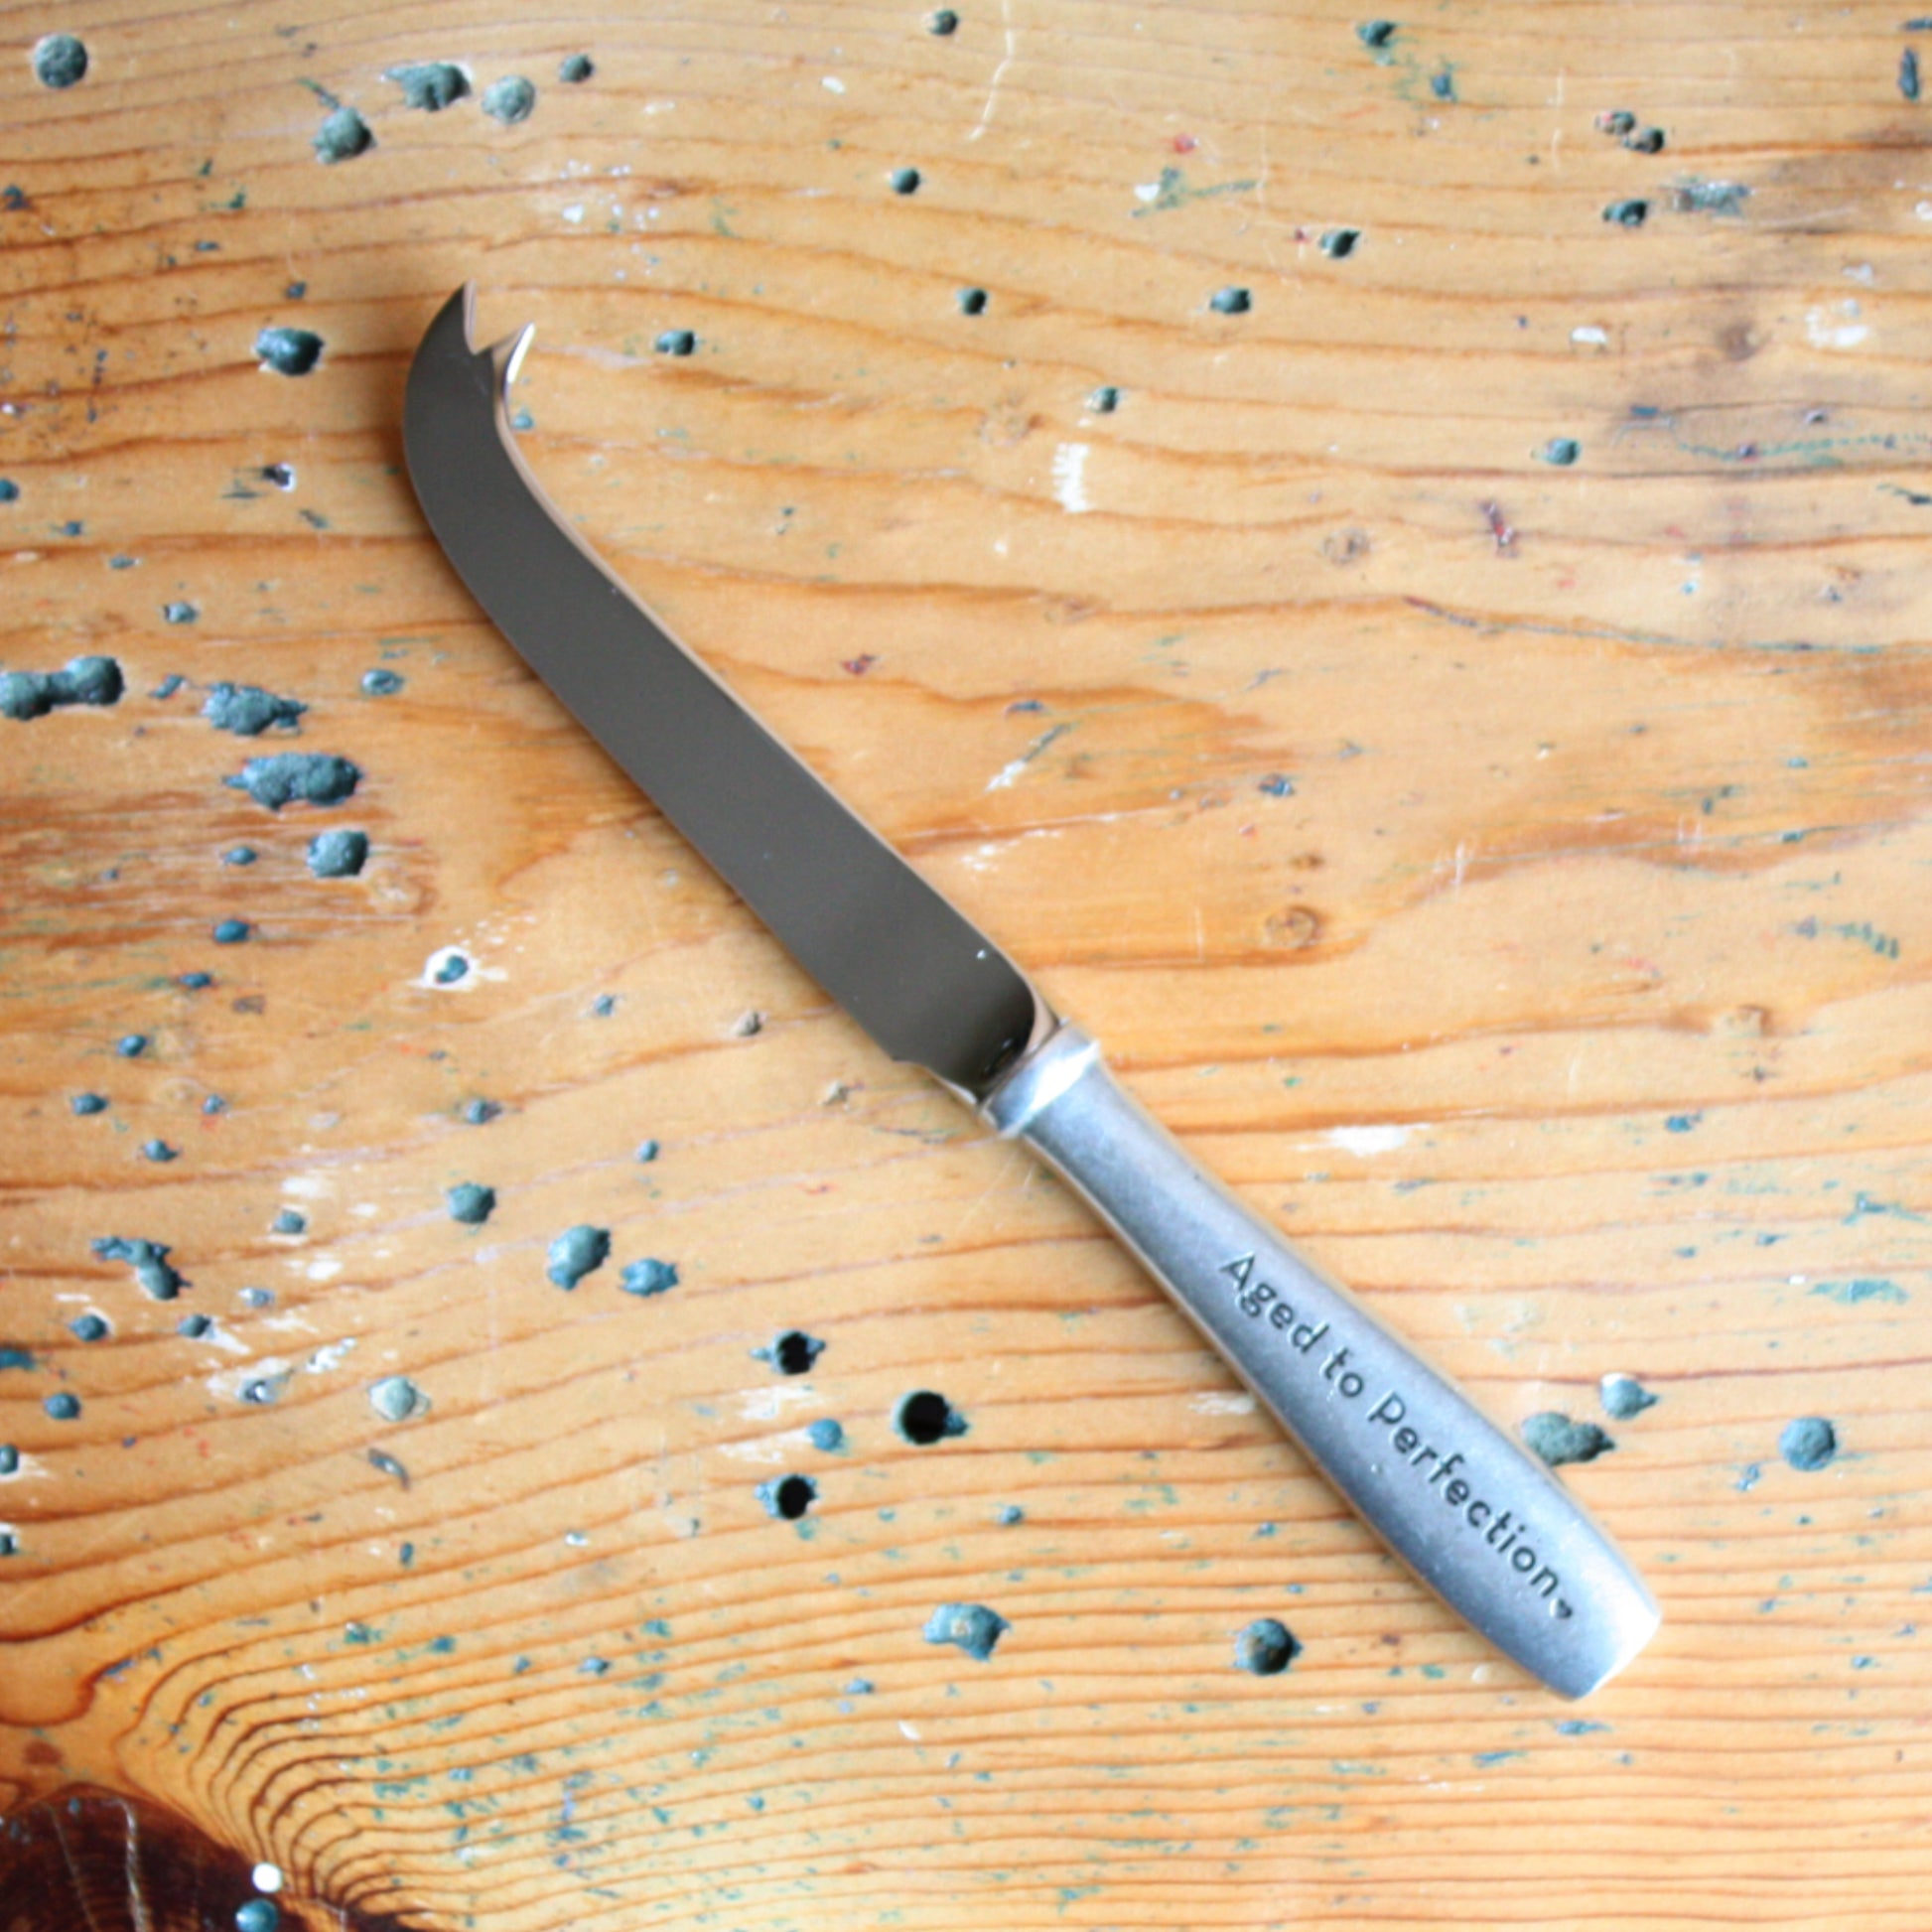 Pewter "Aged to Perfection" Cheese Knife - Made in the USA